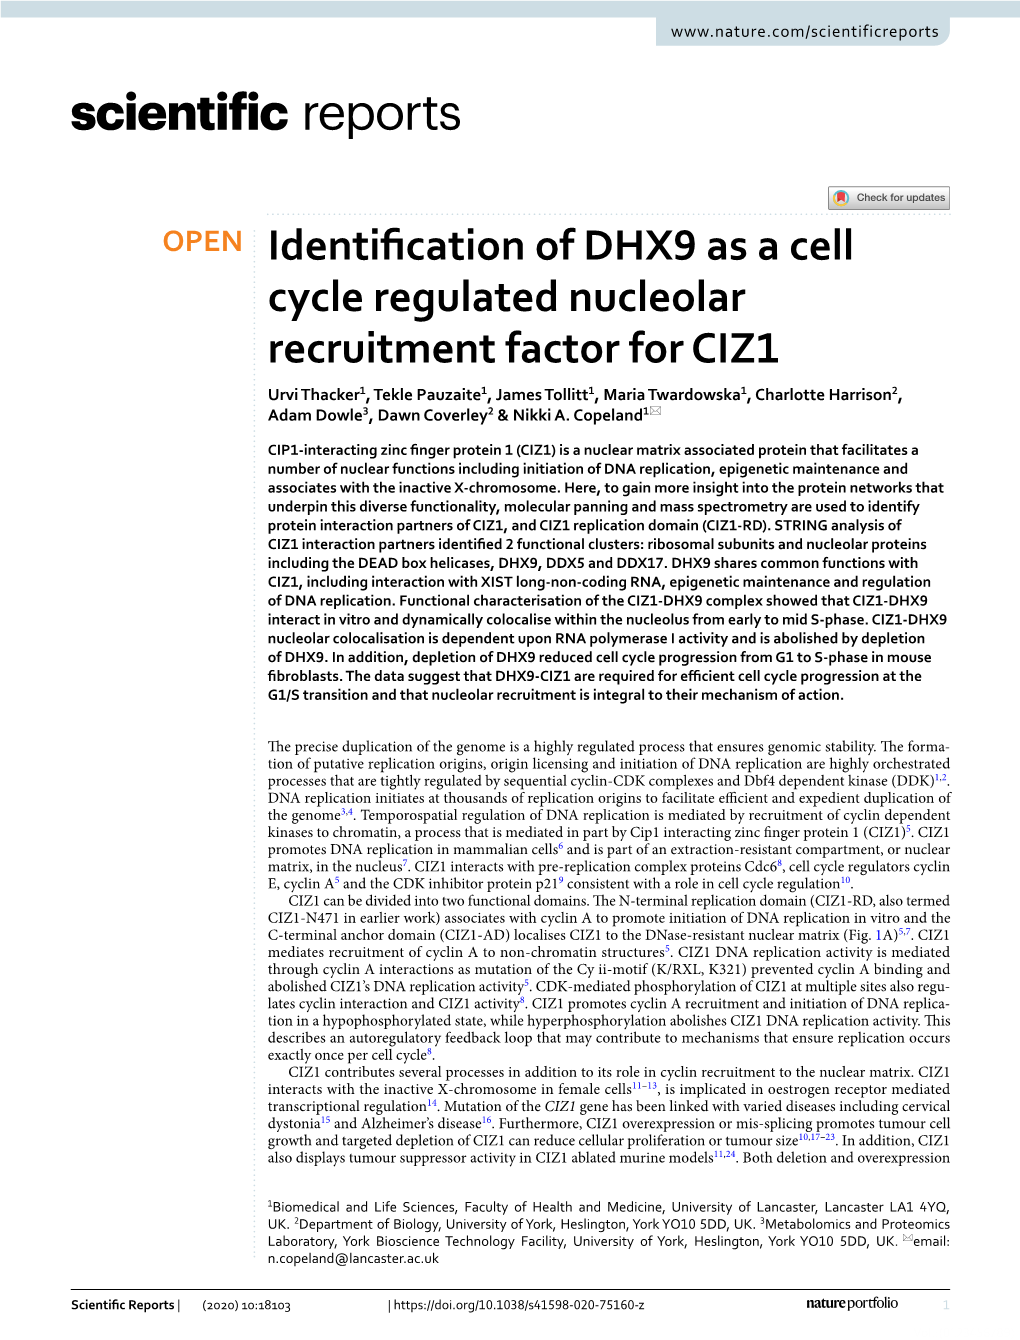 Identification of DHX9 As a Cell Cycle Regulated Nucleolar Recruitment